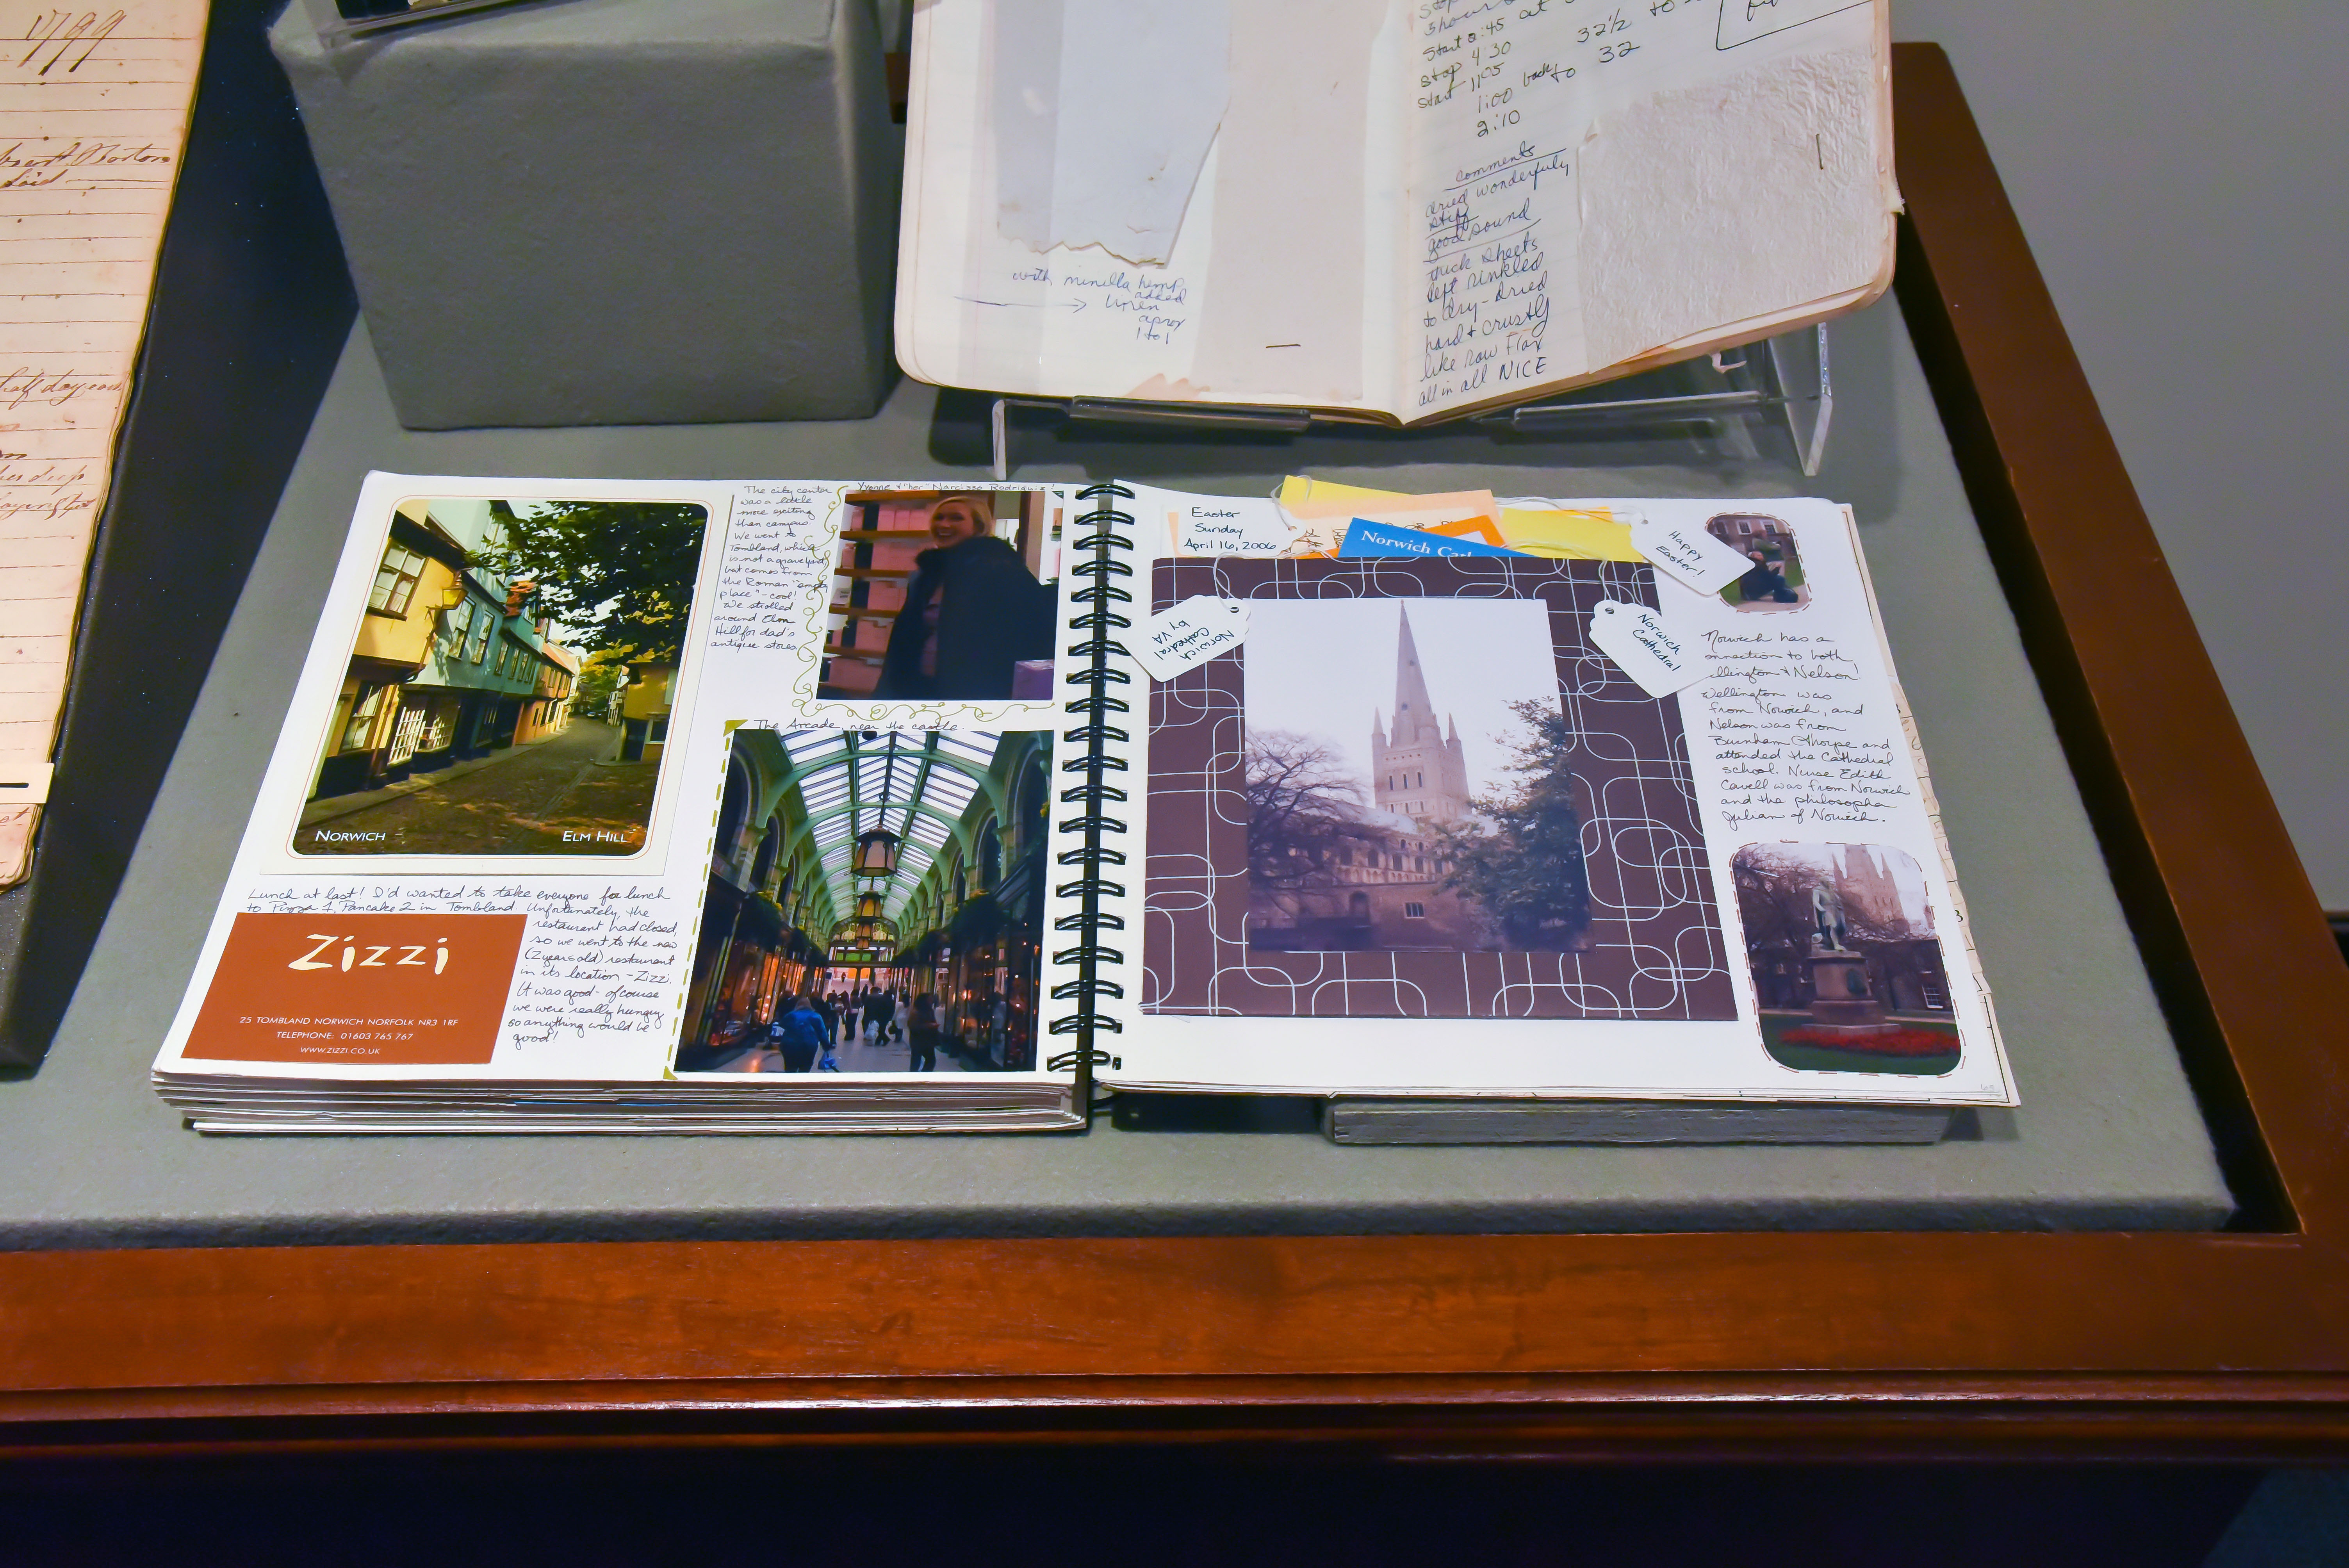 Scrapbook that features photos, pockets of discovery, and memorabilia collected during a family vacation.